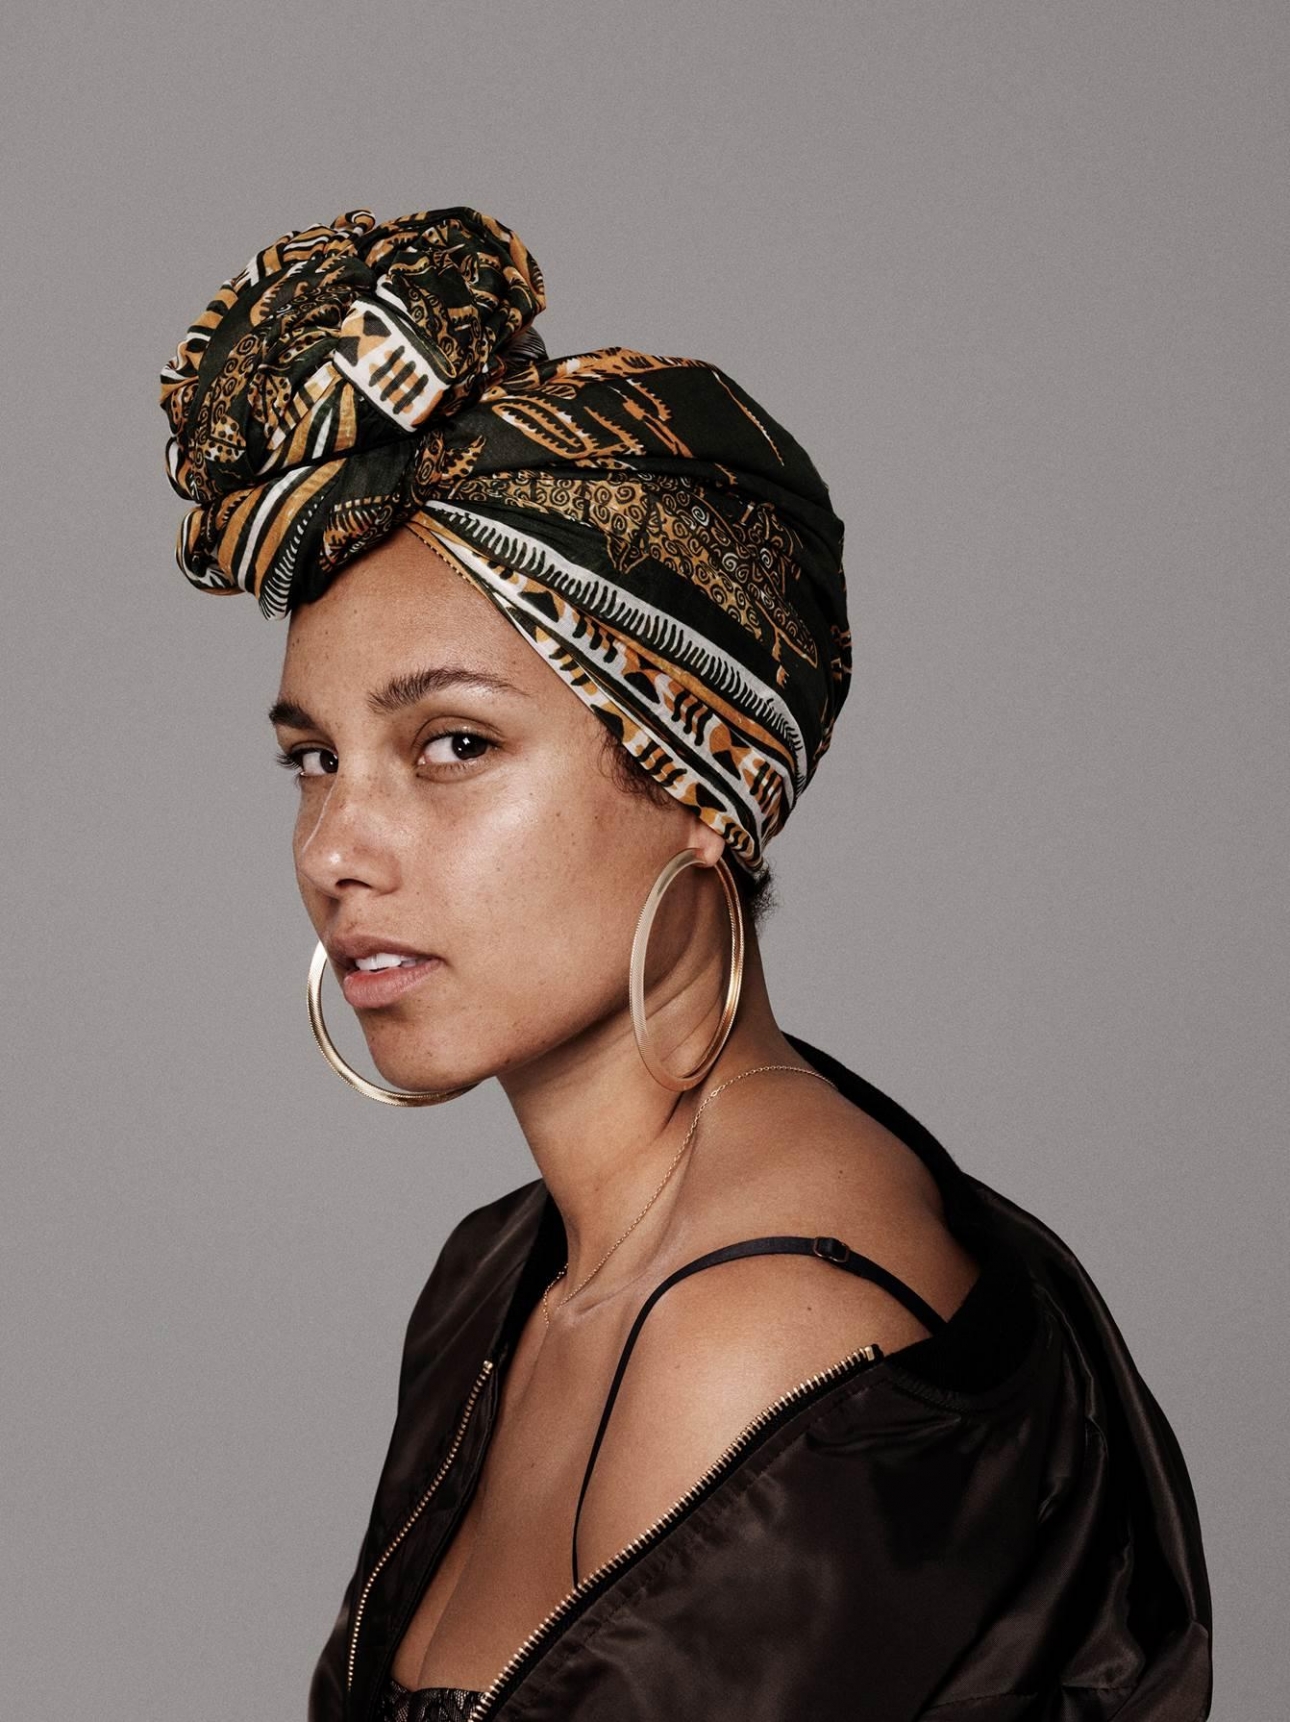 Interview Alicia Keys Talk About About The Optimism And Creativity 